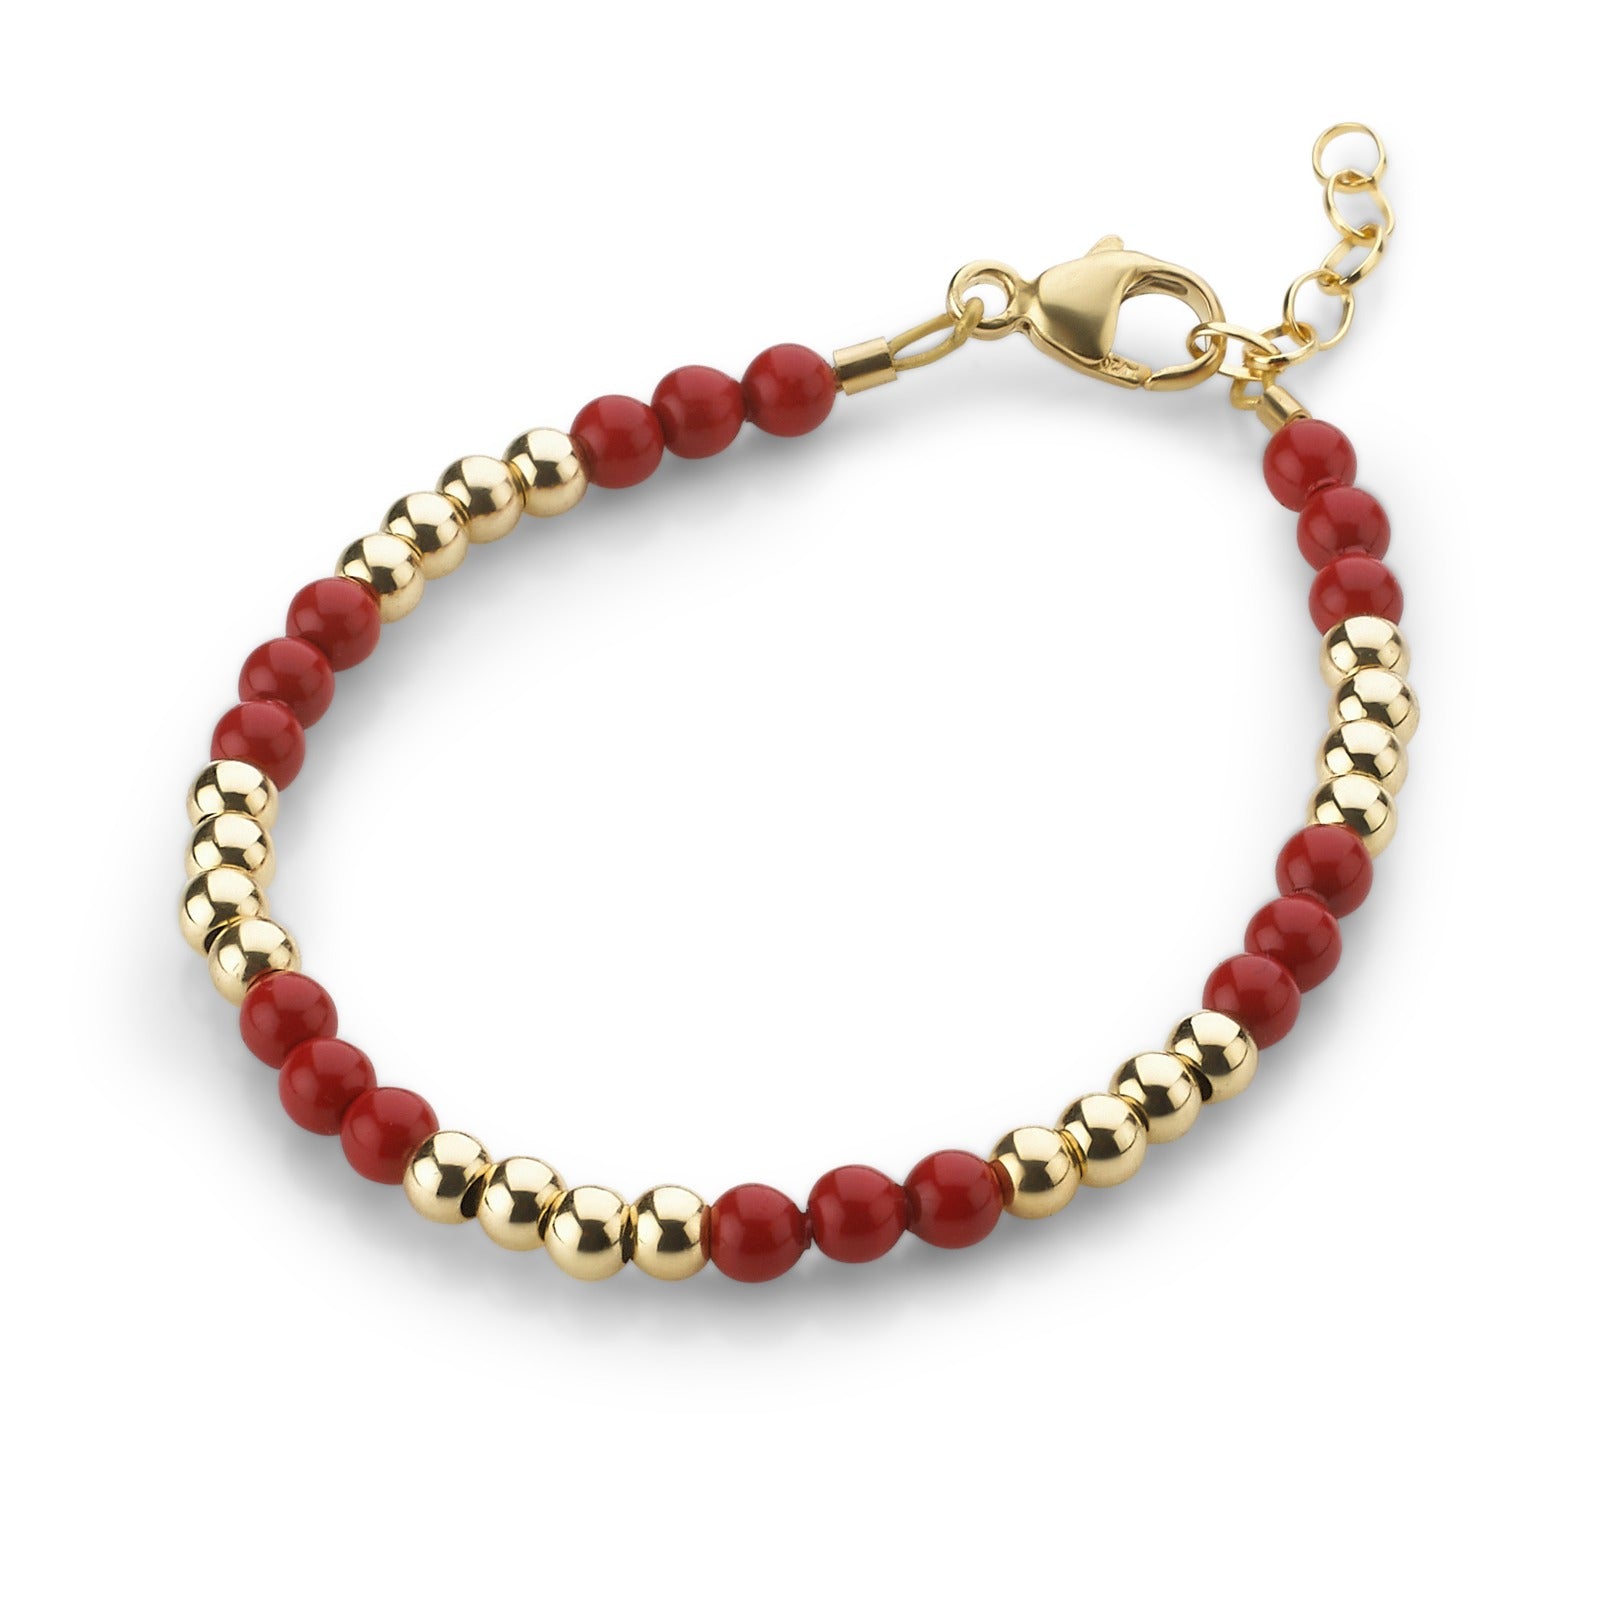 Red and gold beaded baby bracelet